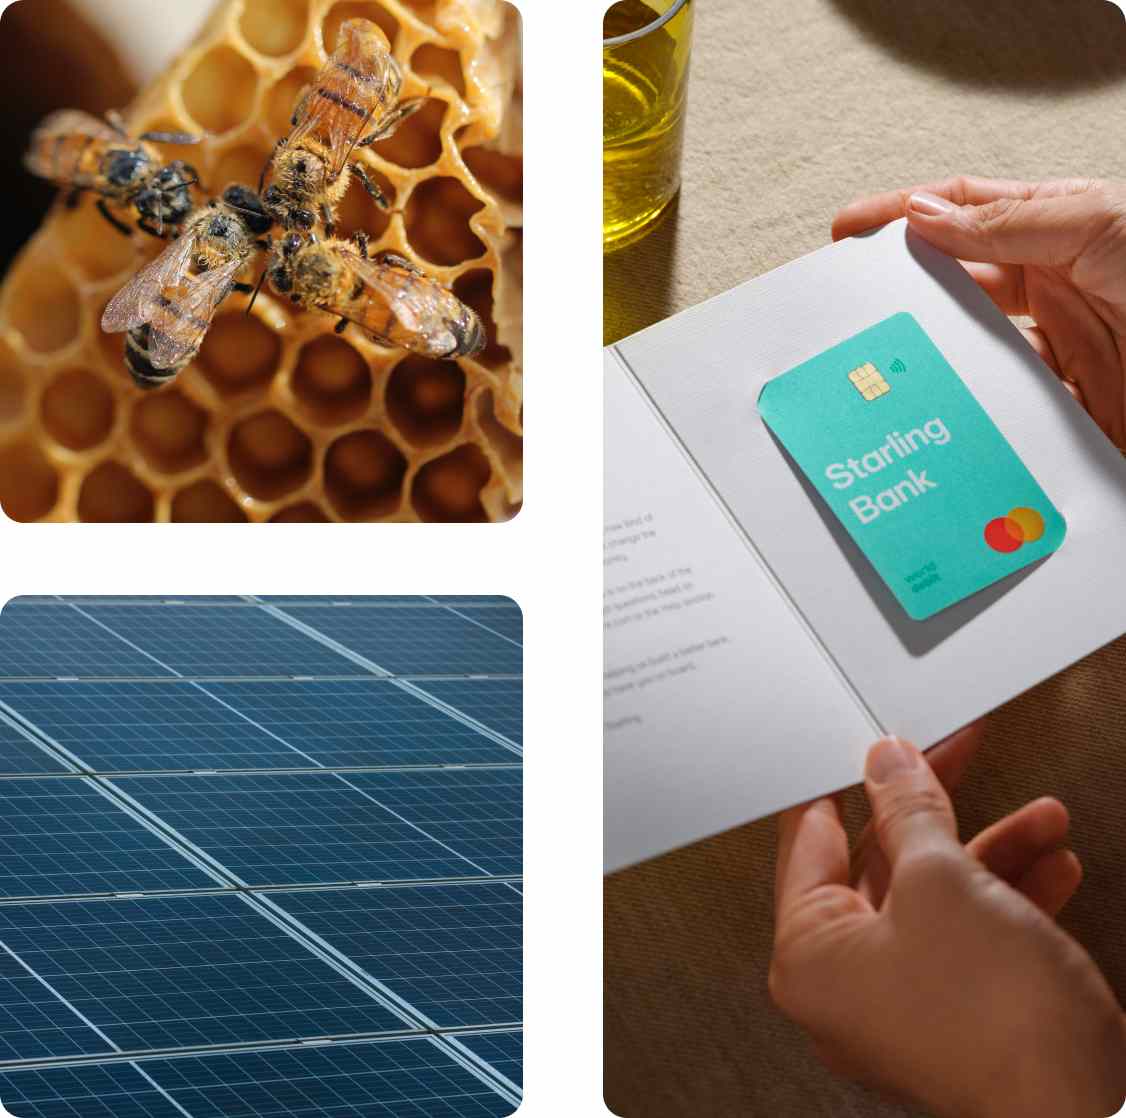 A collection of 3 images. The bees, solar panels, Starling bank card in a packaging Starling bank card in the hand.